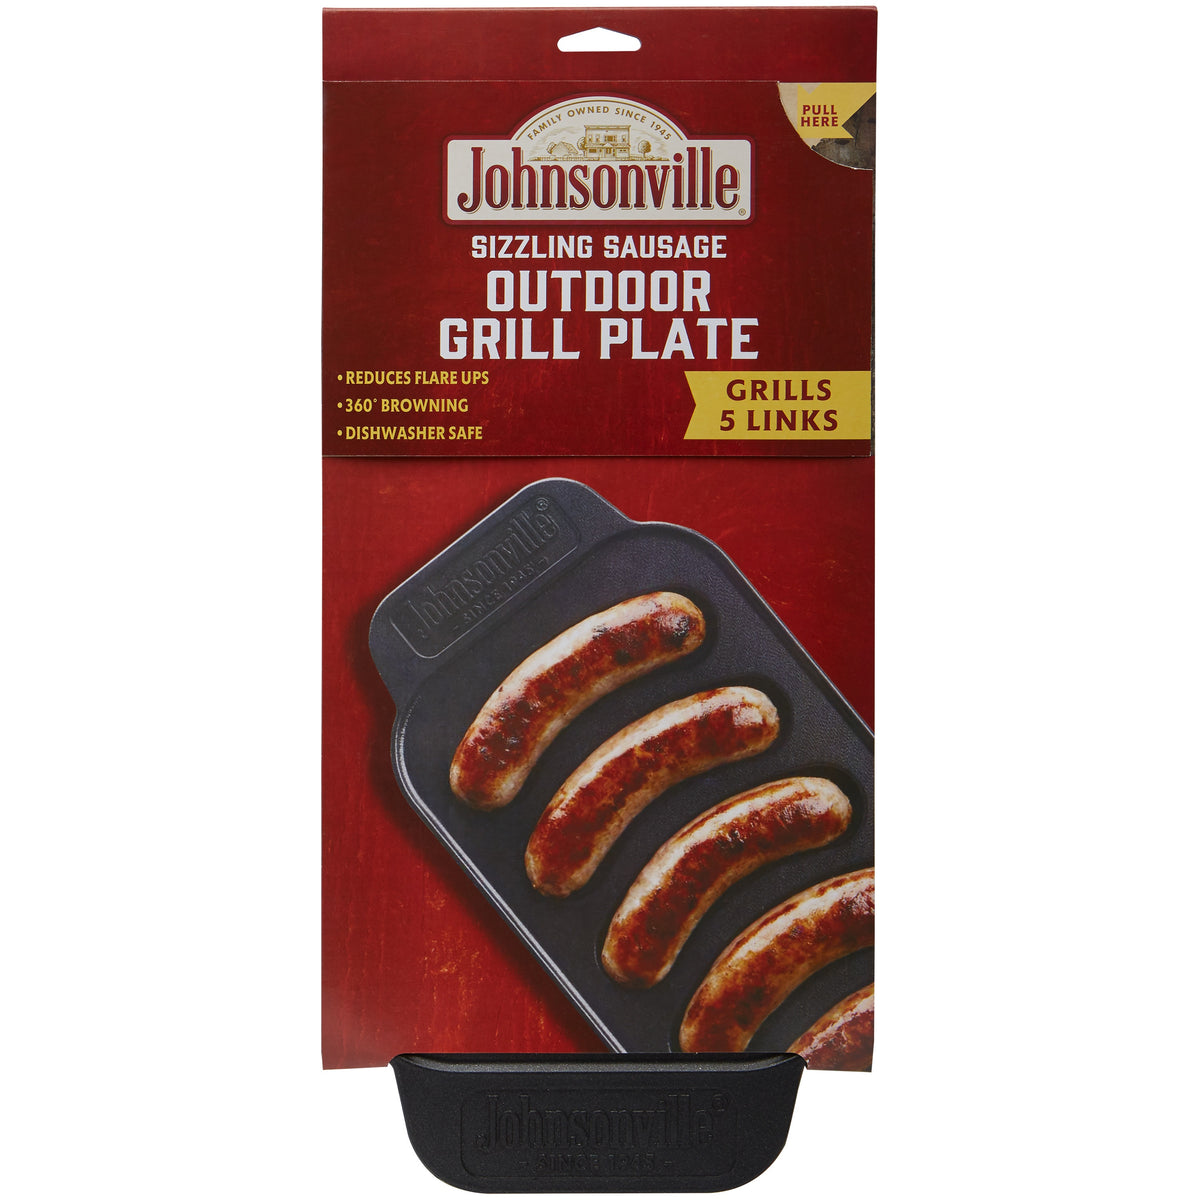 Johnsonville Sizzling Sausage Grill PLUS 3 In 1 Indoor Grill